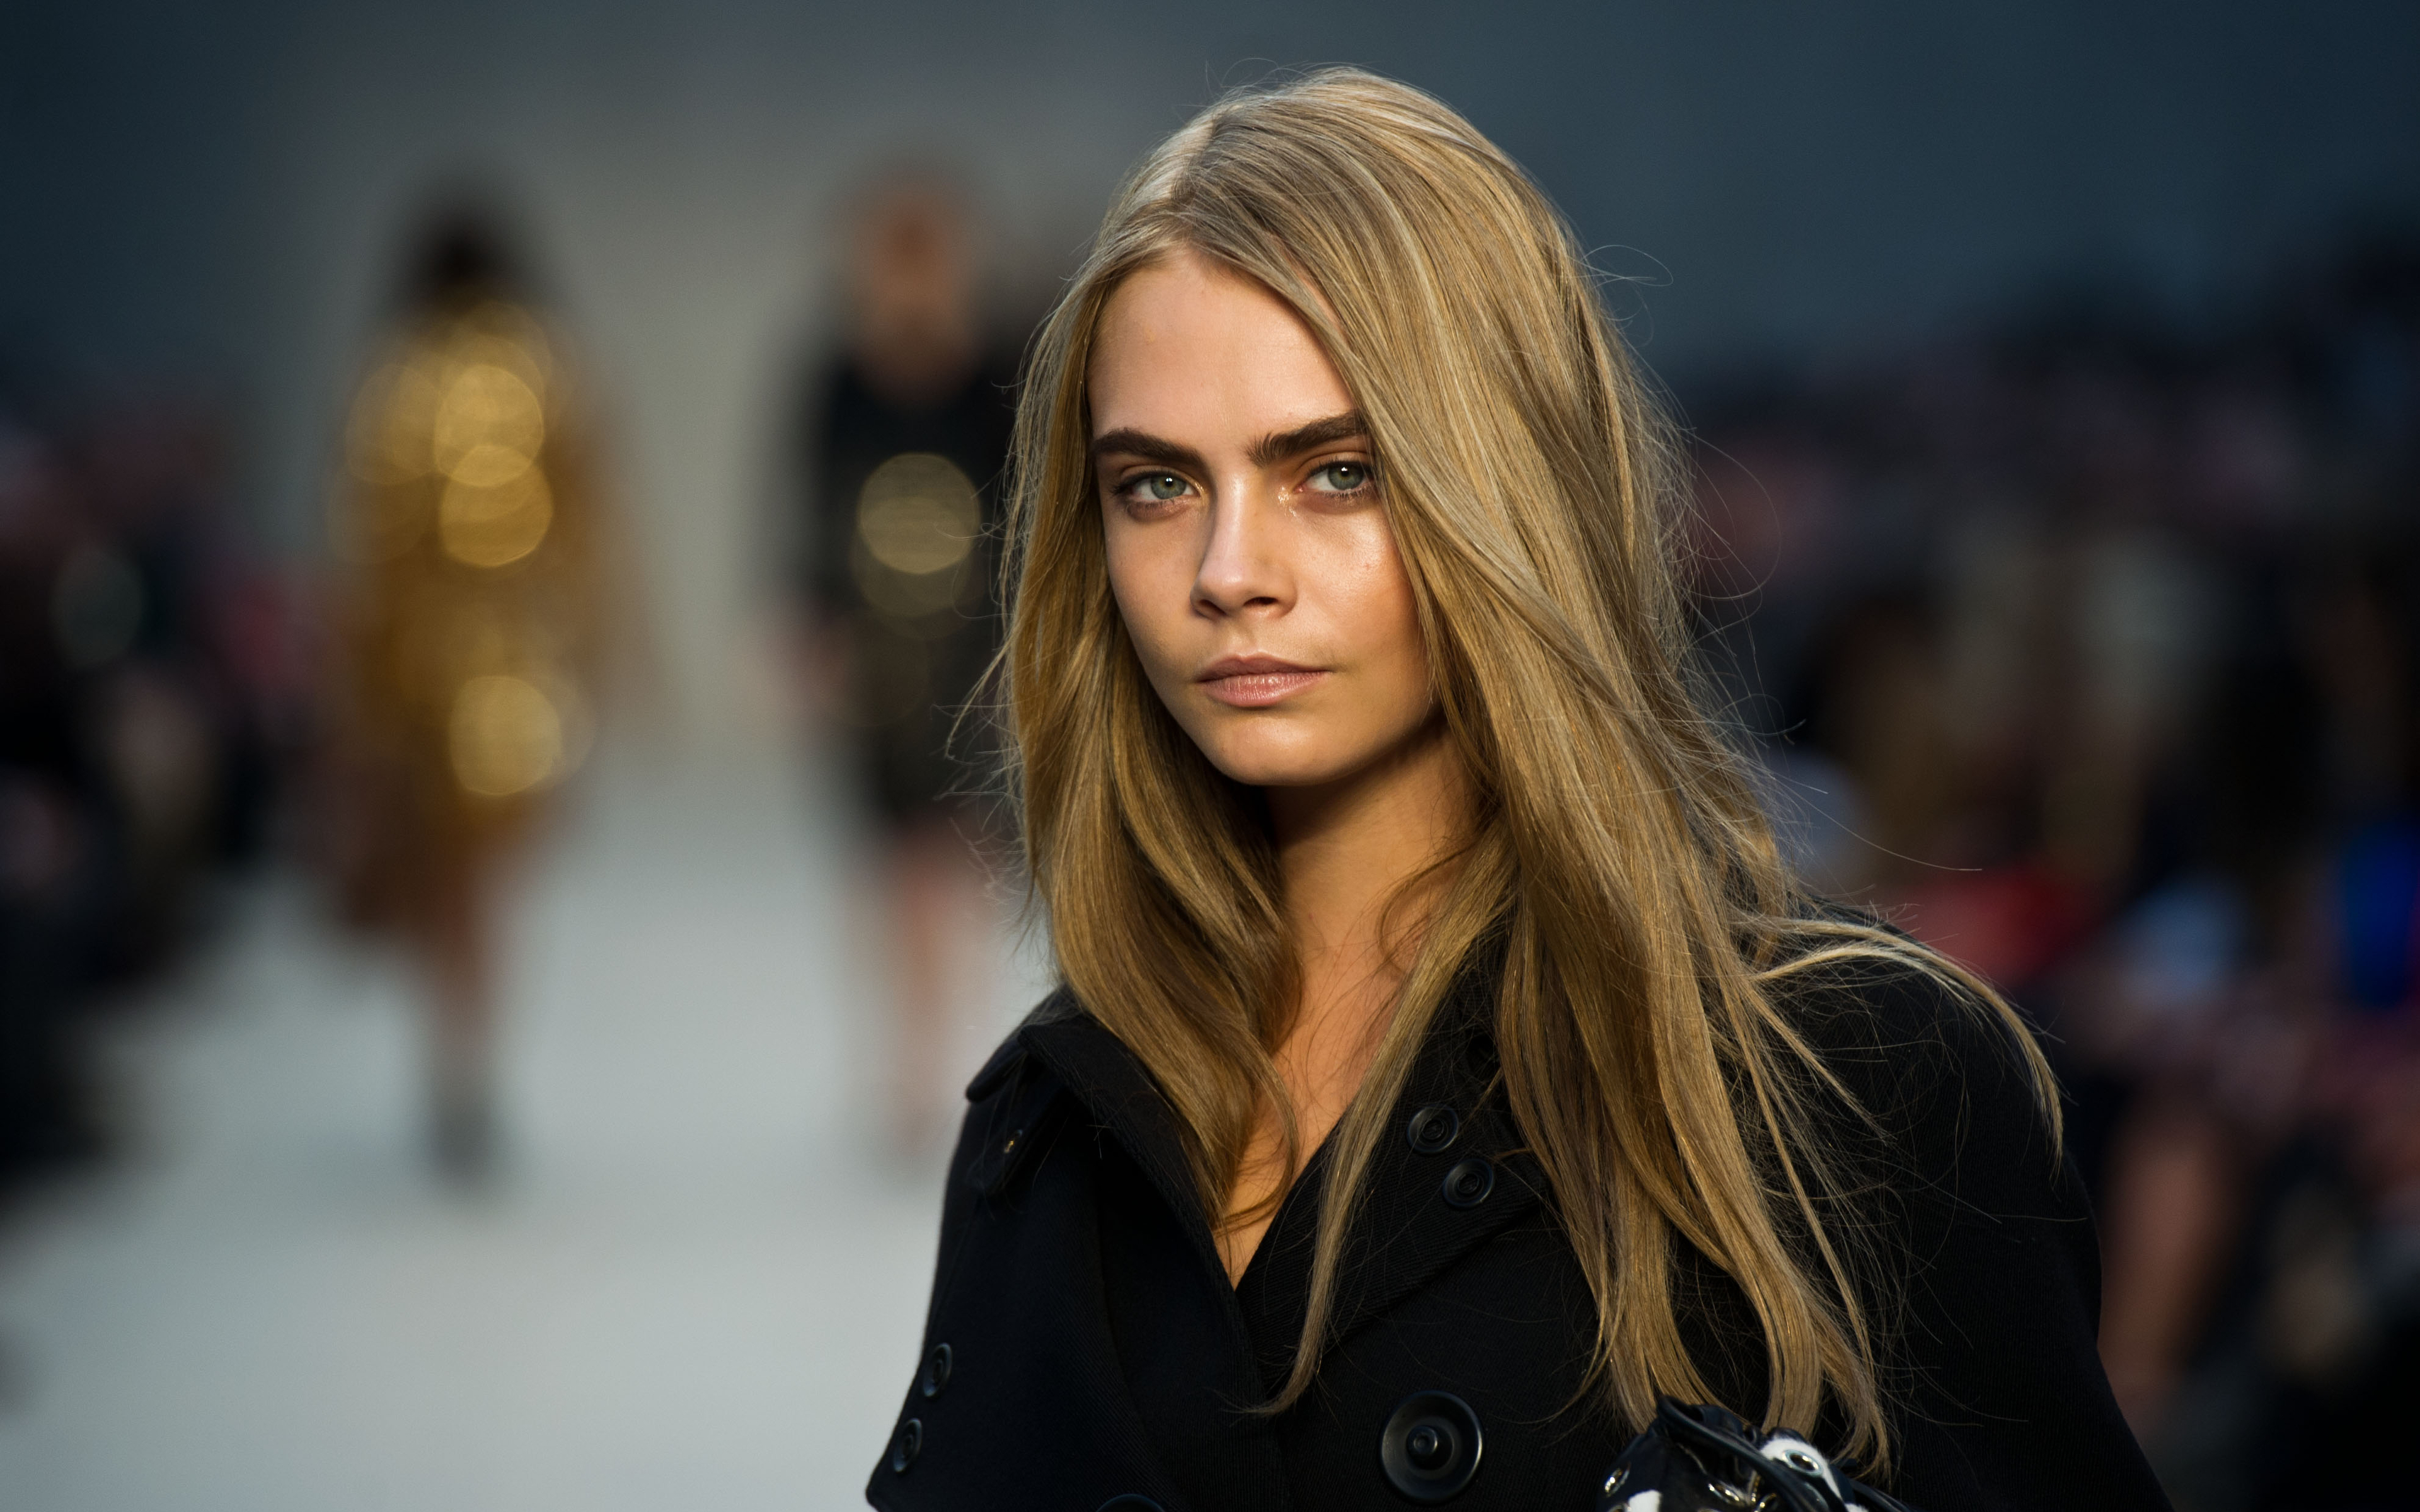 Cara Delevingne Wallpapers, Pictures, Images